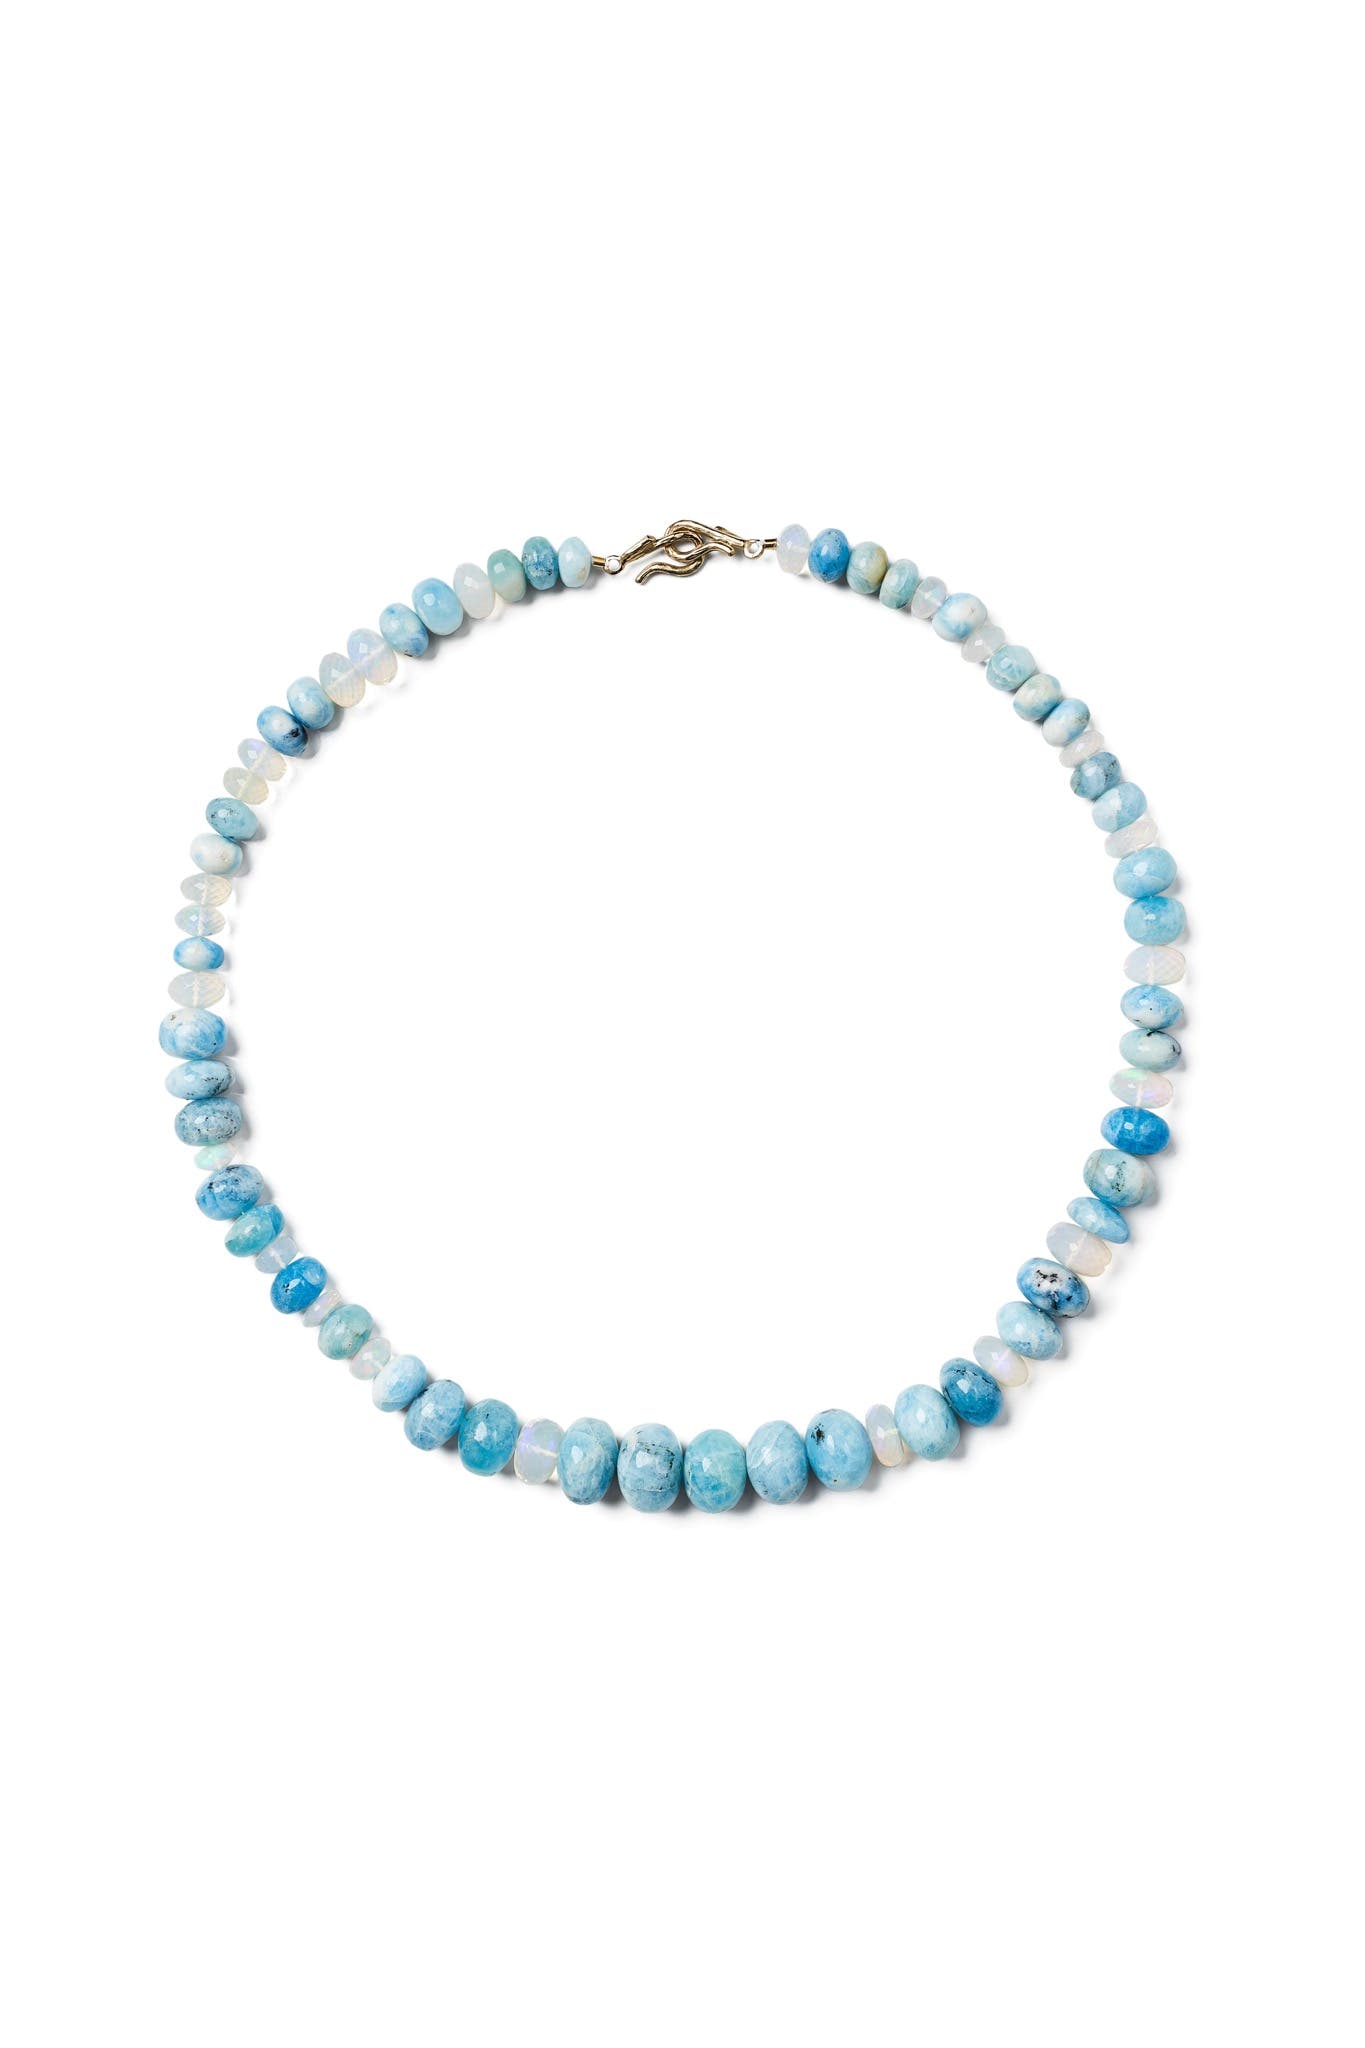 Hackmanite and Opal Necklace image